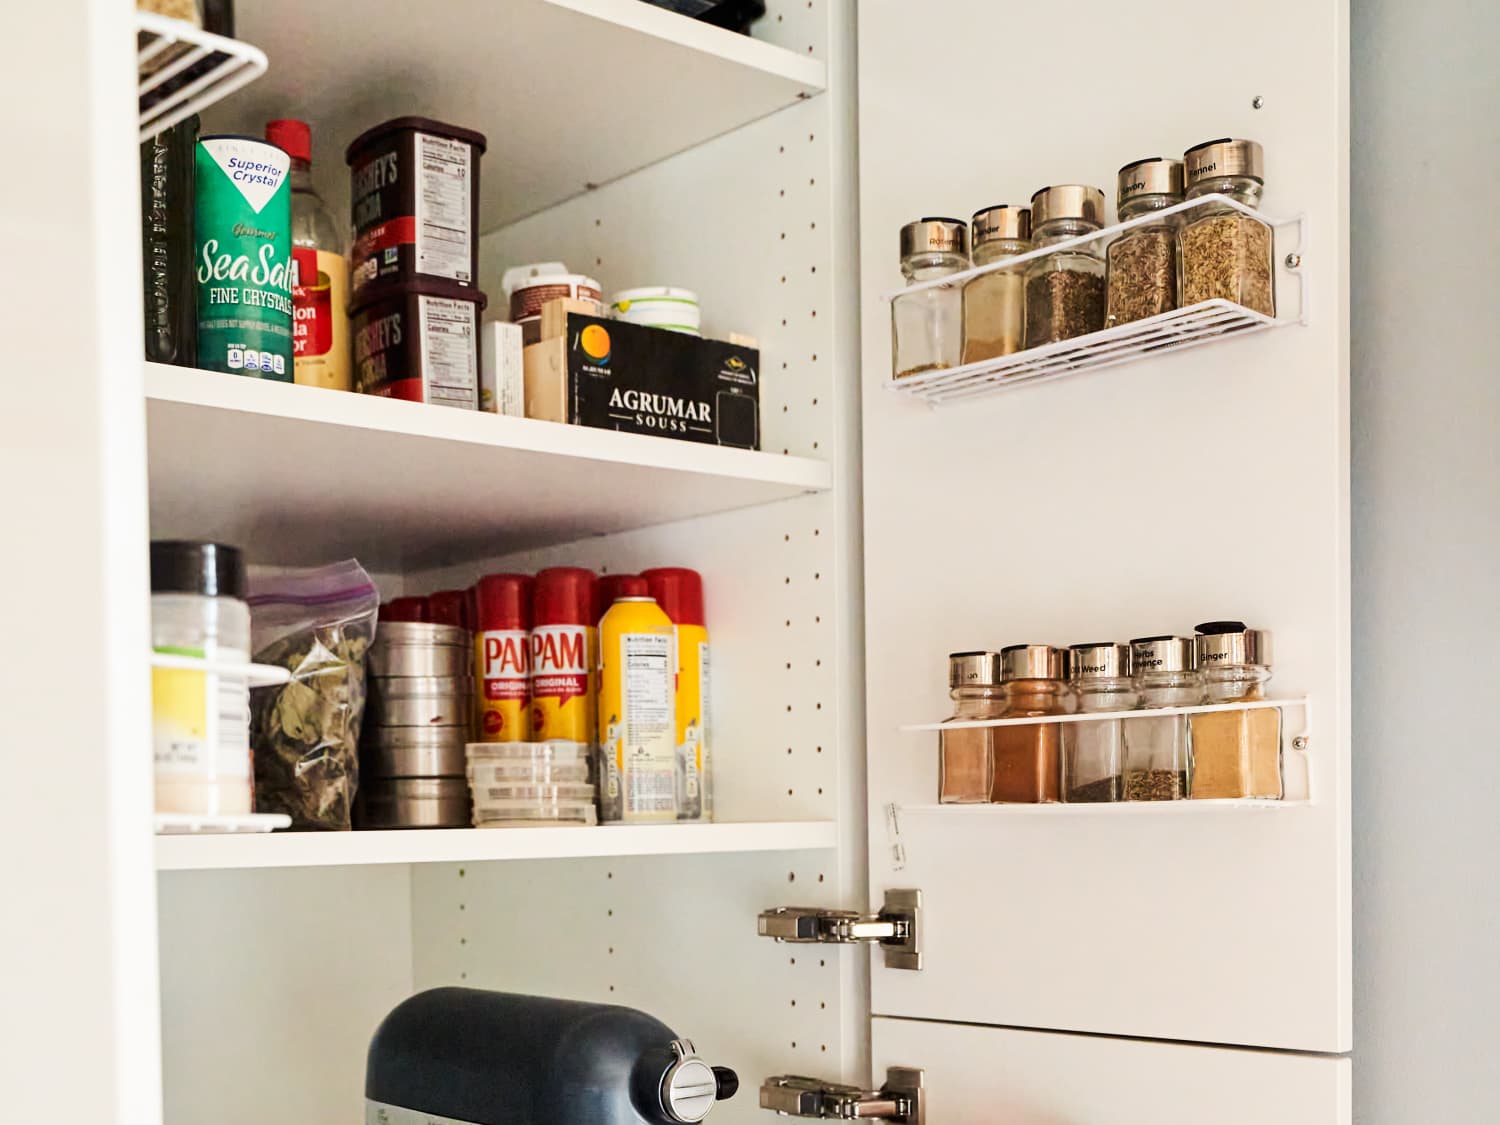 6 Smarter Ways to Reorganize Your Kitchen And Pantry Using Baskets